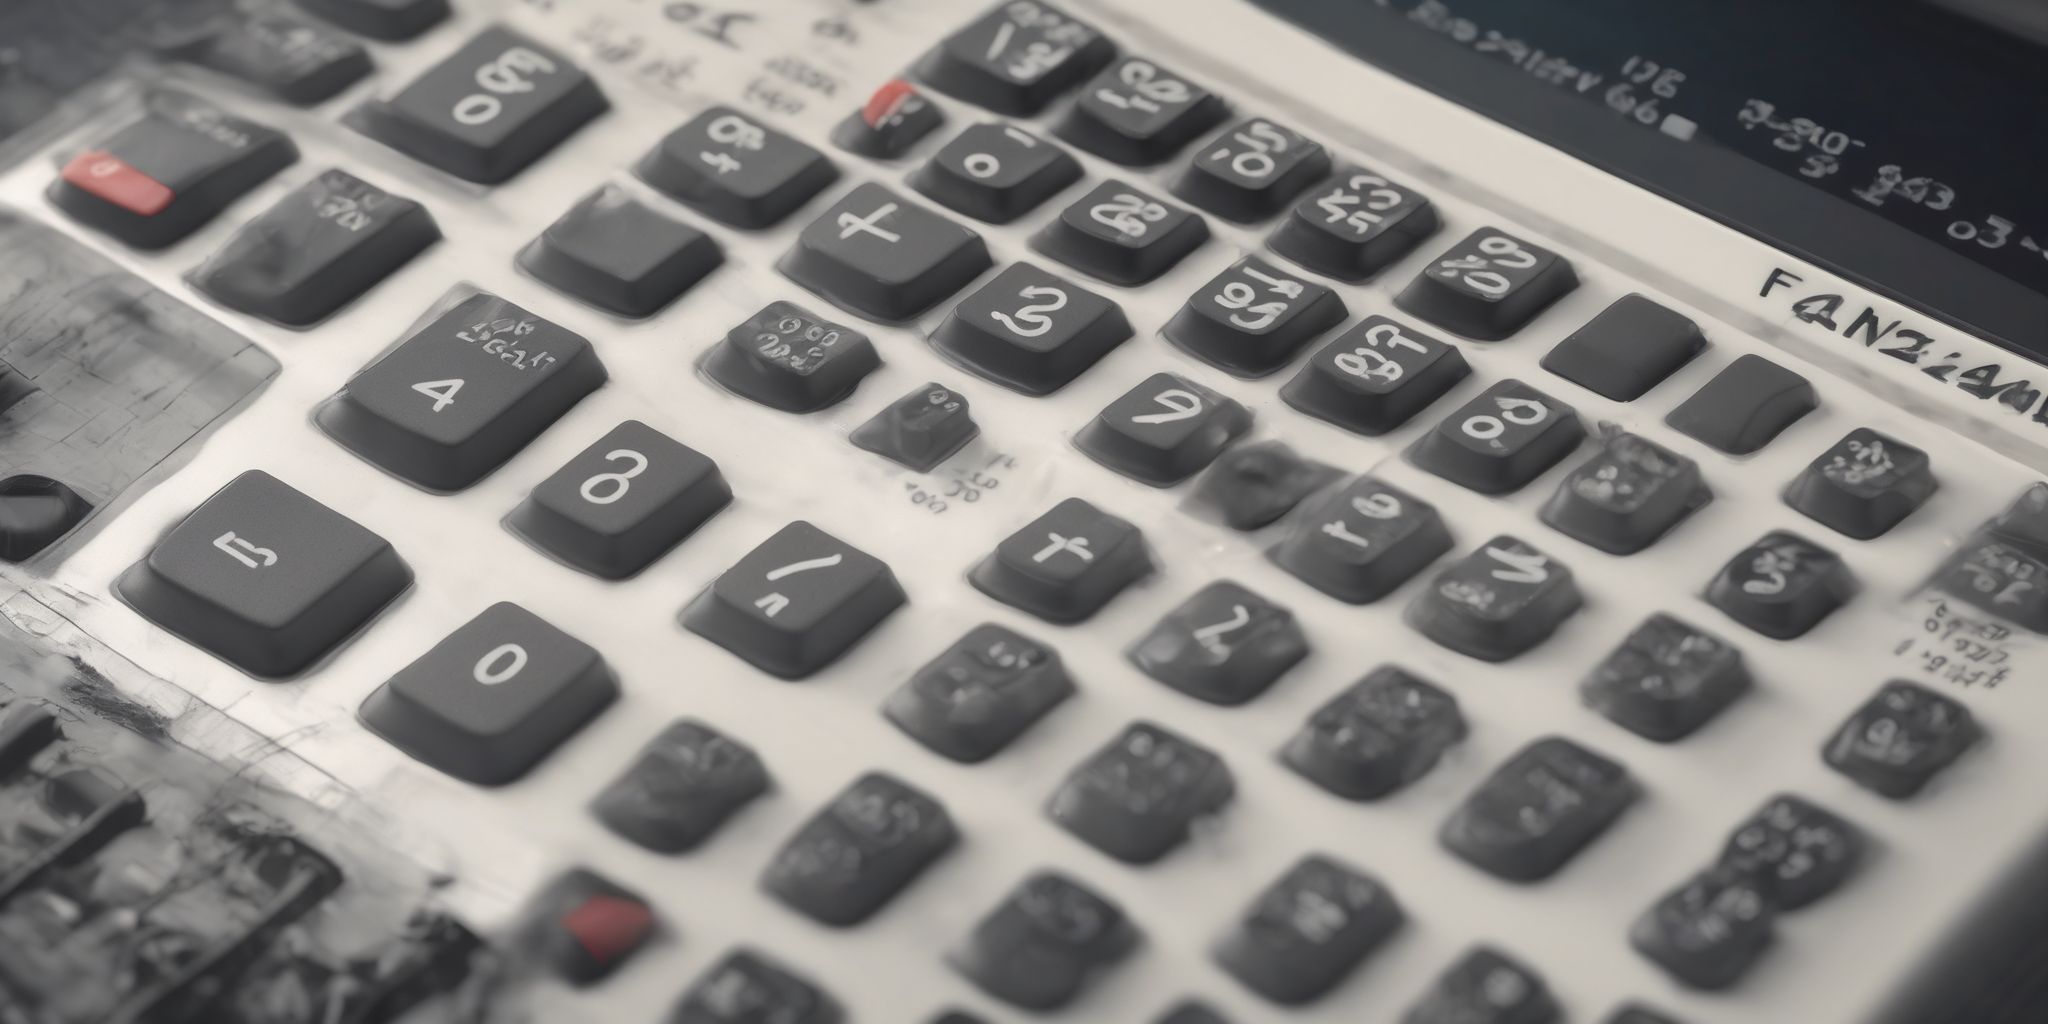 Calculator  in realistic, photographic style